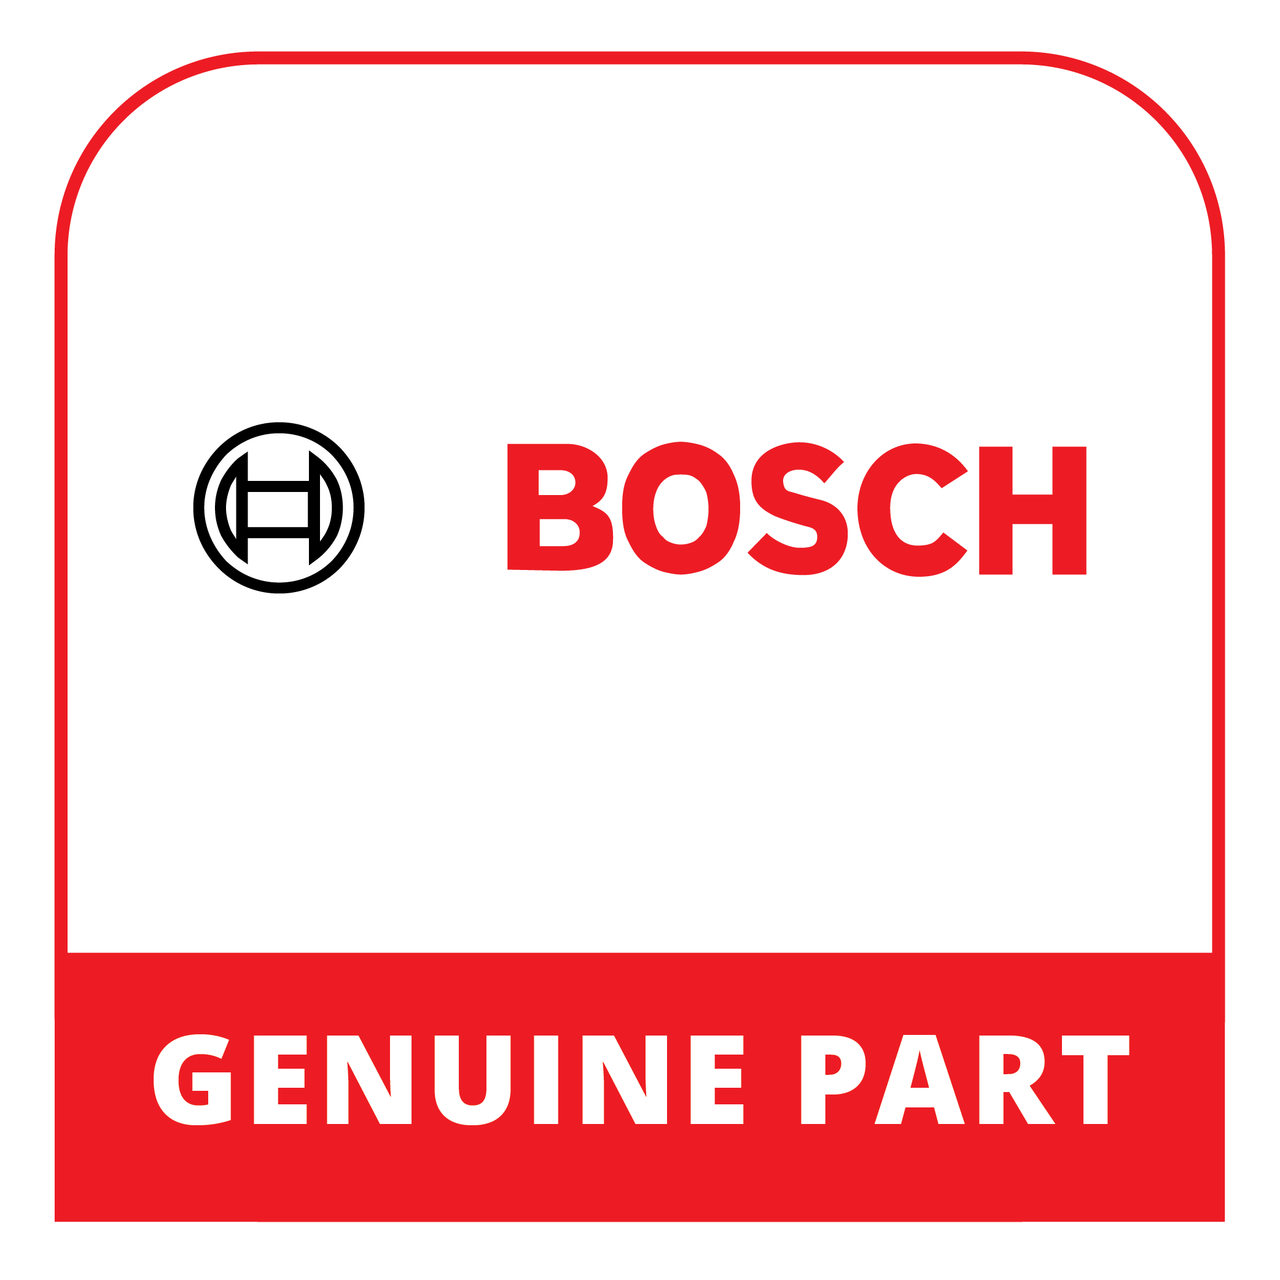 Bosch (Thermador) 10013302 - Cable Harness - Genuine Bosch (Thermador) Part